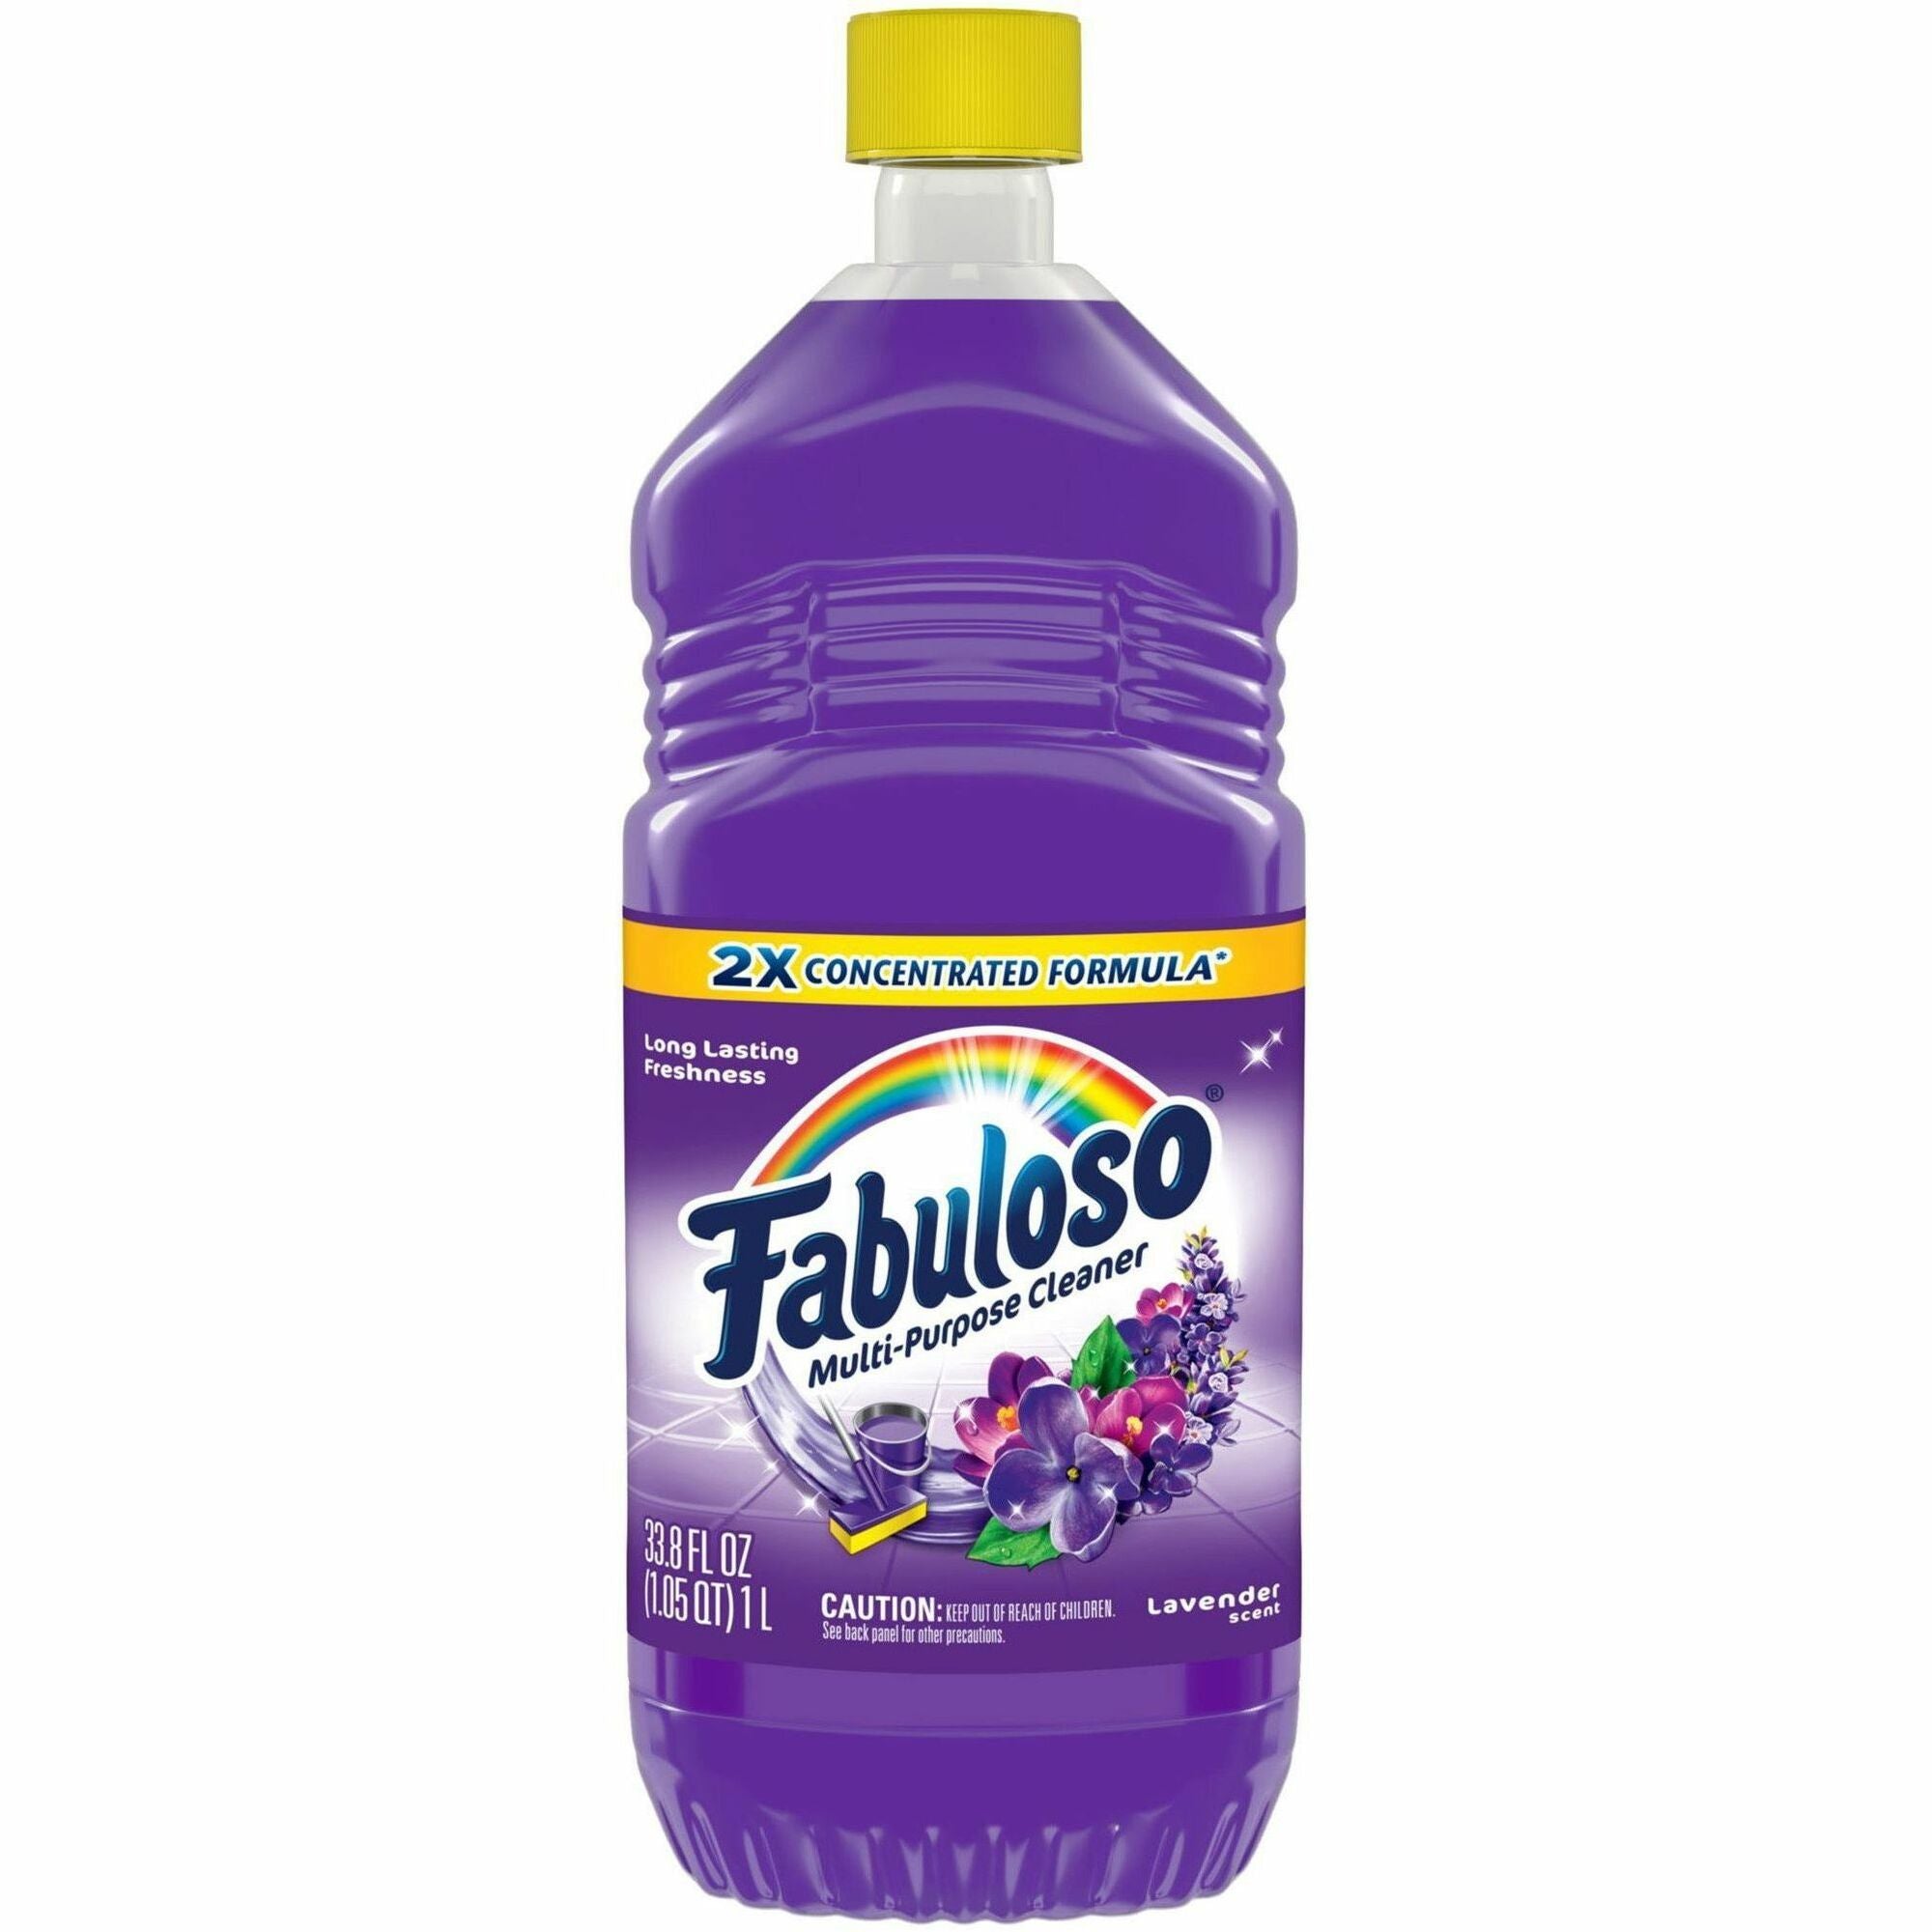 Fabuloso All-Purpose Cleaner - 33.8 fl oz (1.1 quart) - Lavender Scent - 1 Each - Rinse-free, Residue-free, Long Lasting - Lavender - 1